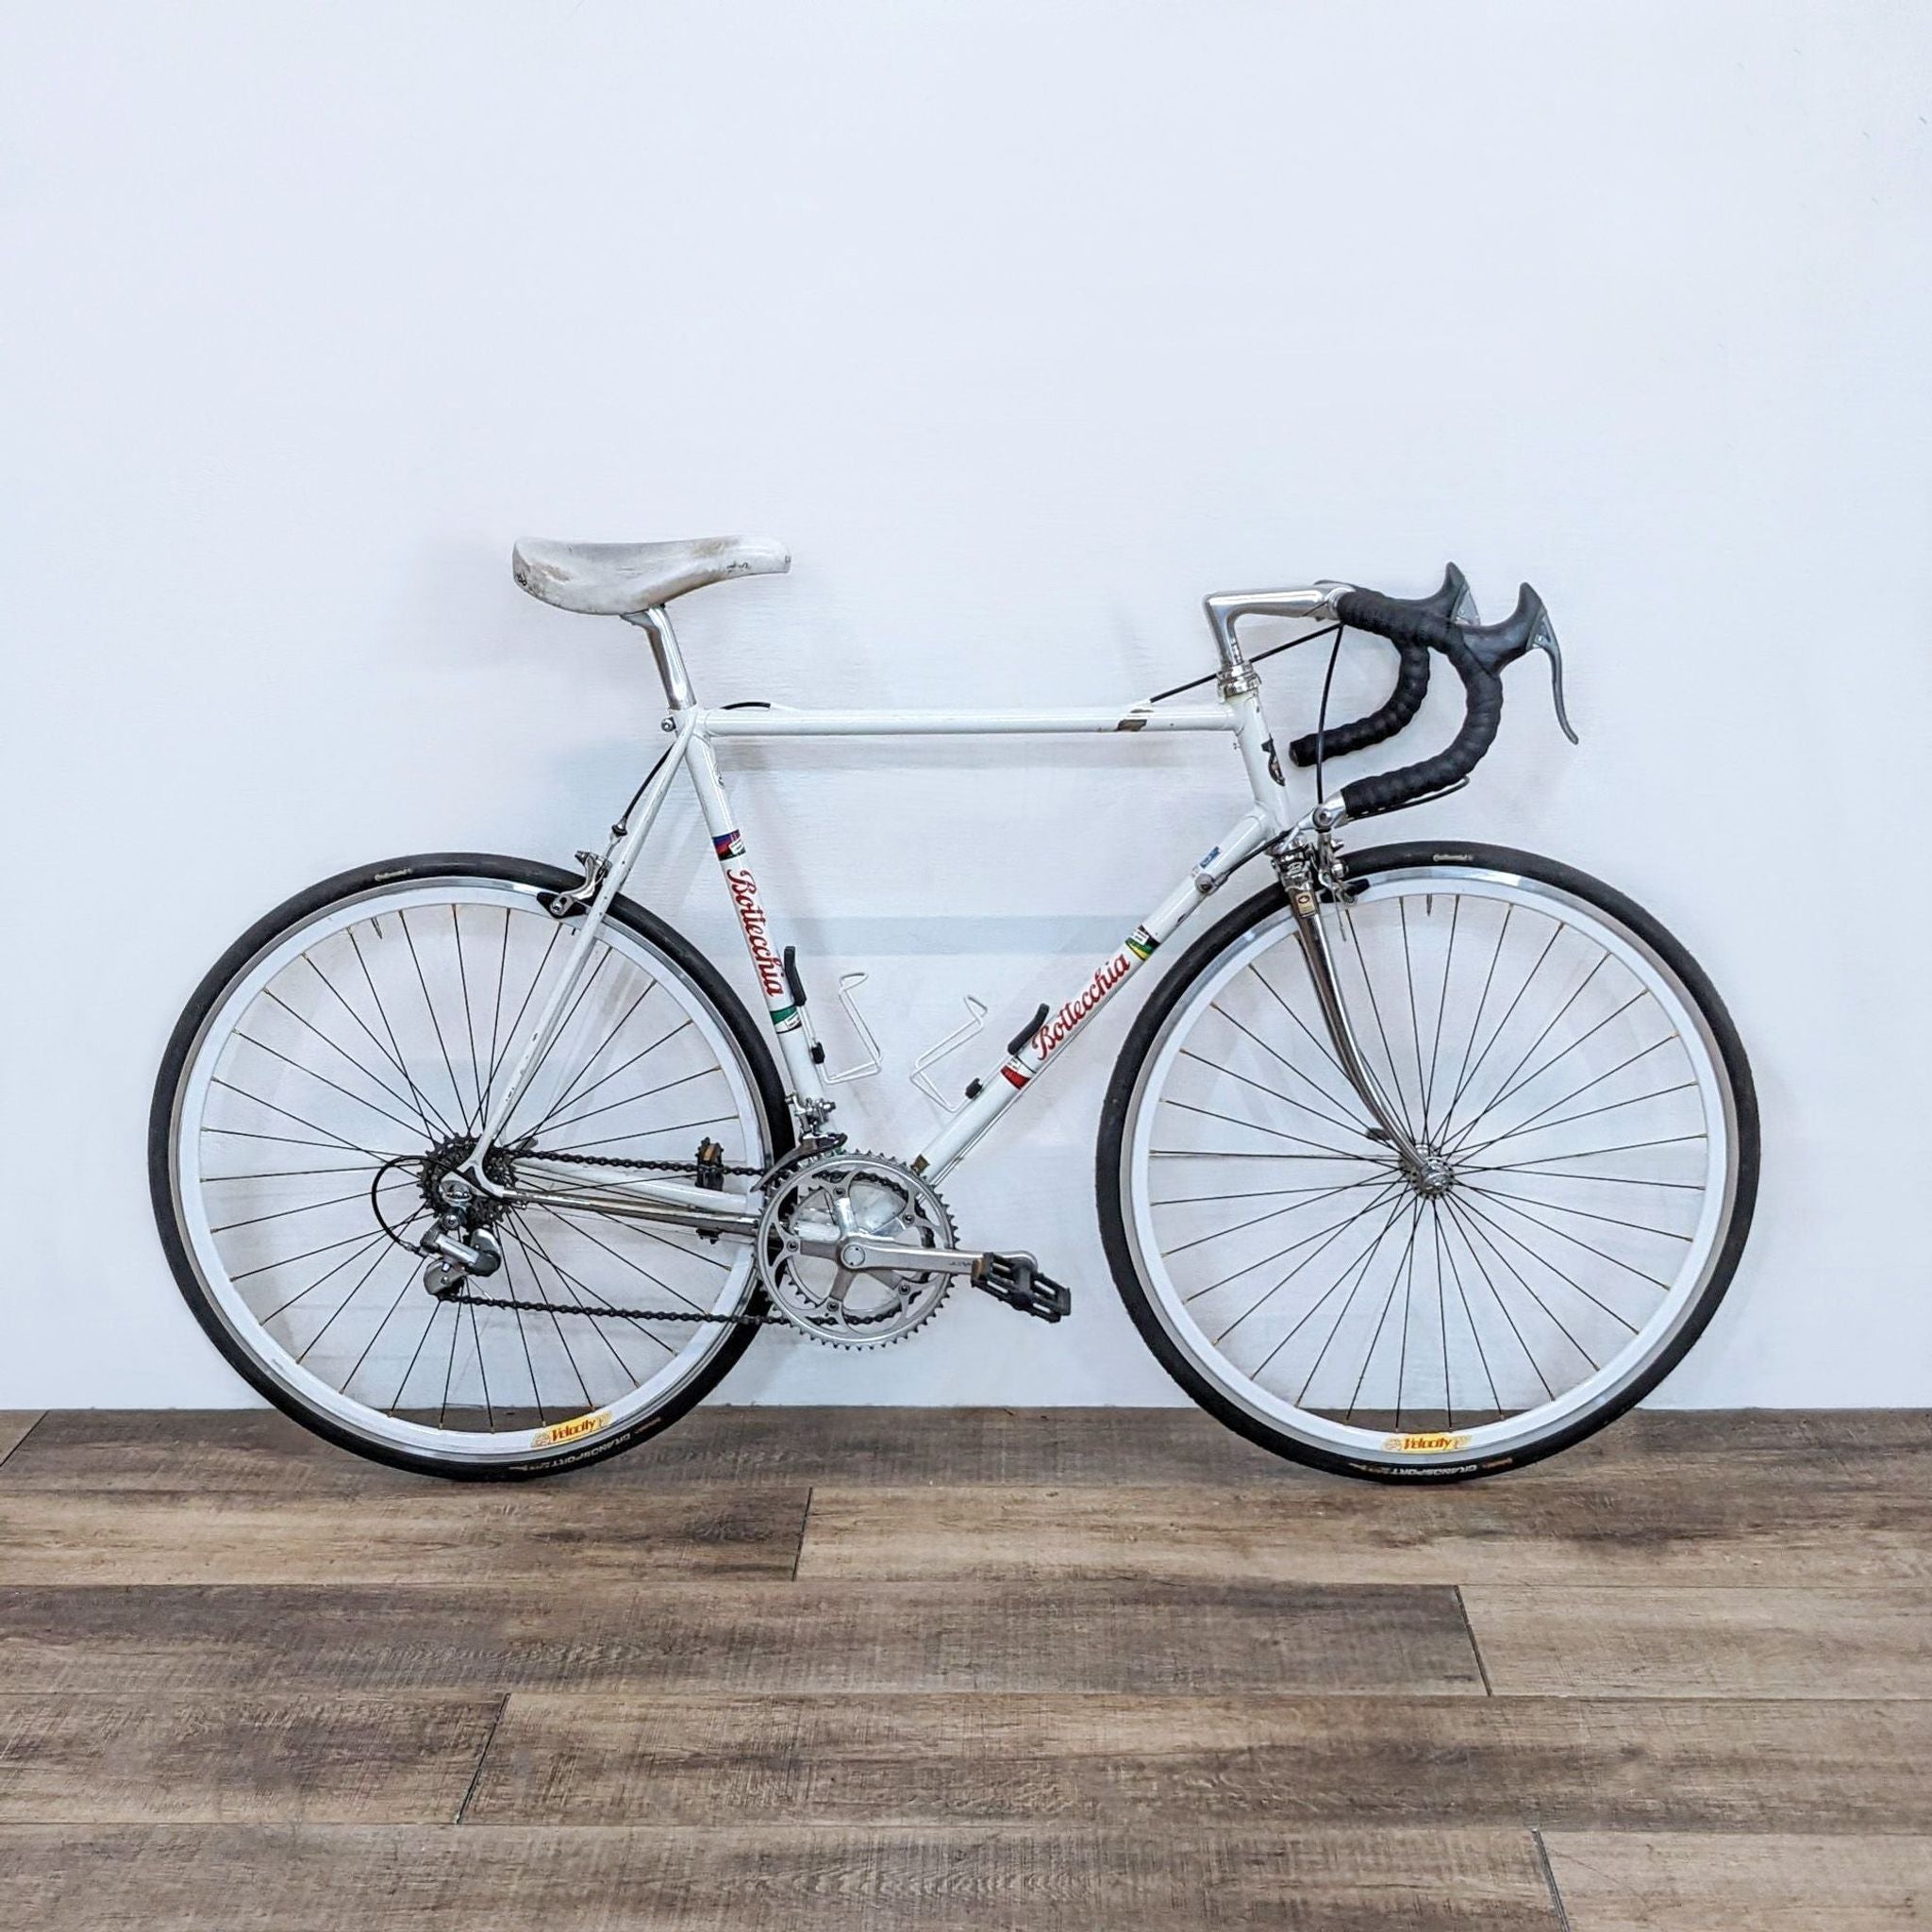 Bottecchia road bike with sturdy frame and reliable brakes, ideal for long rides and commutes, against a white wall.